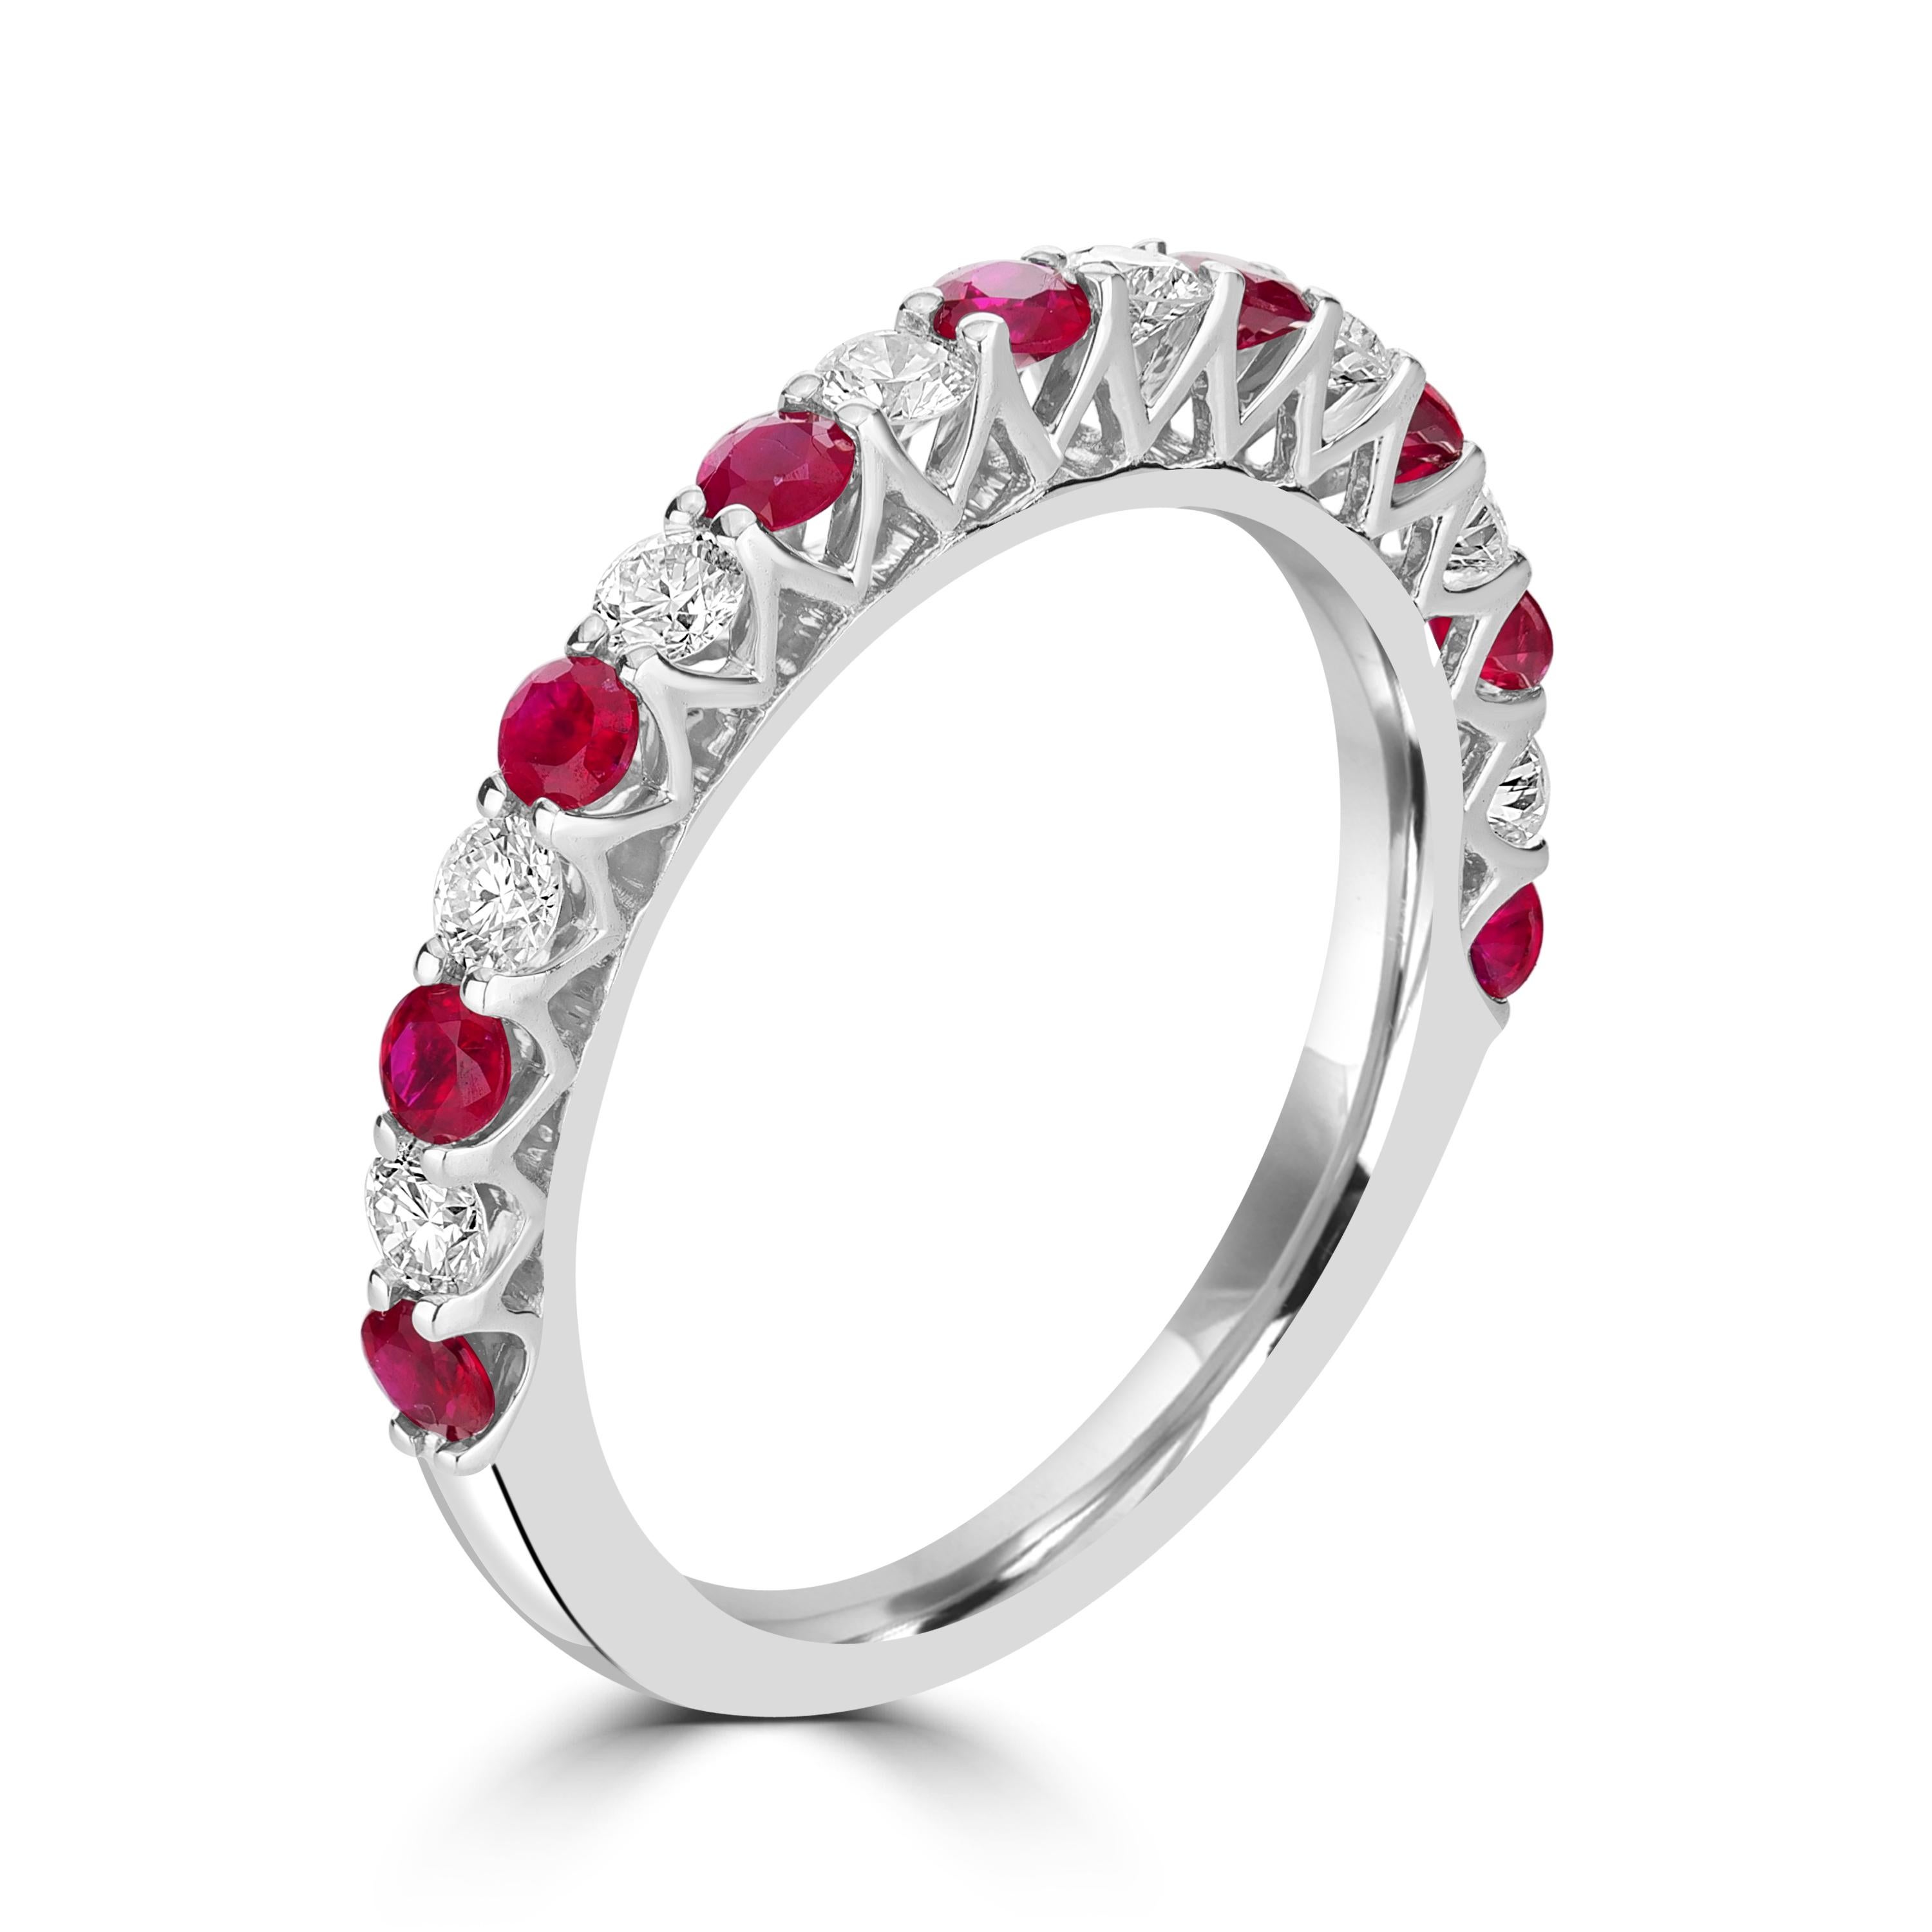 We present to you this beautiful 0.92 Carats Ruby and Diamond Eternity Ring made in 14K White Gold. This ring consists of 2.3mm rubies and diamonds rounds with 9 ruby pieces and 8 diamond pieces totaling 17 pieces of stones. The rubies used are from